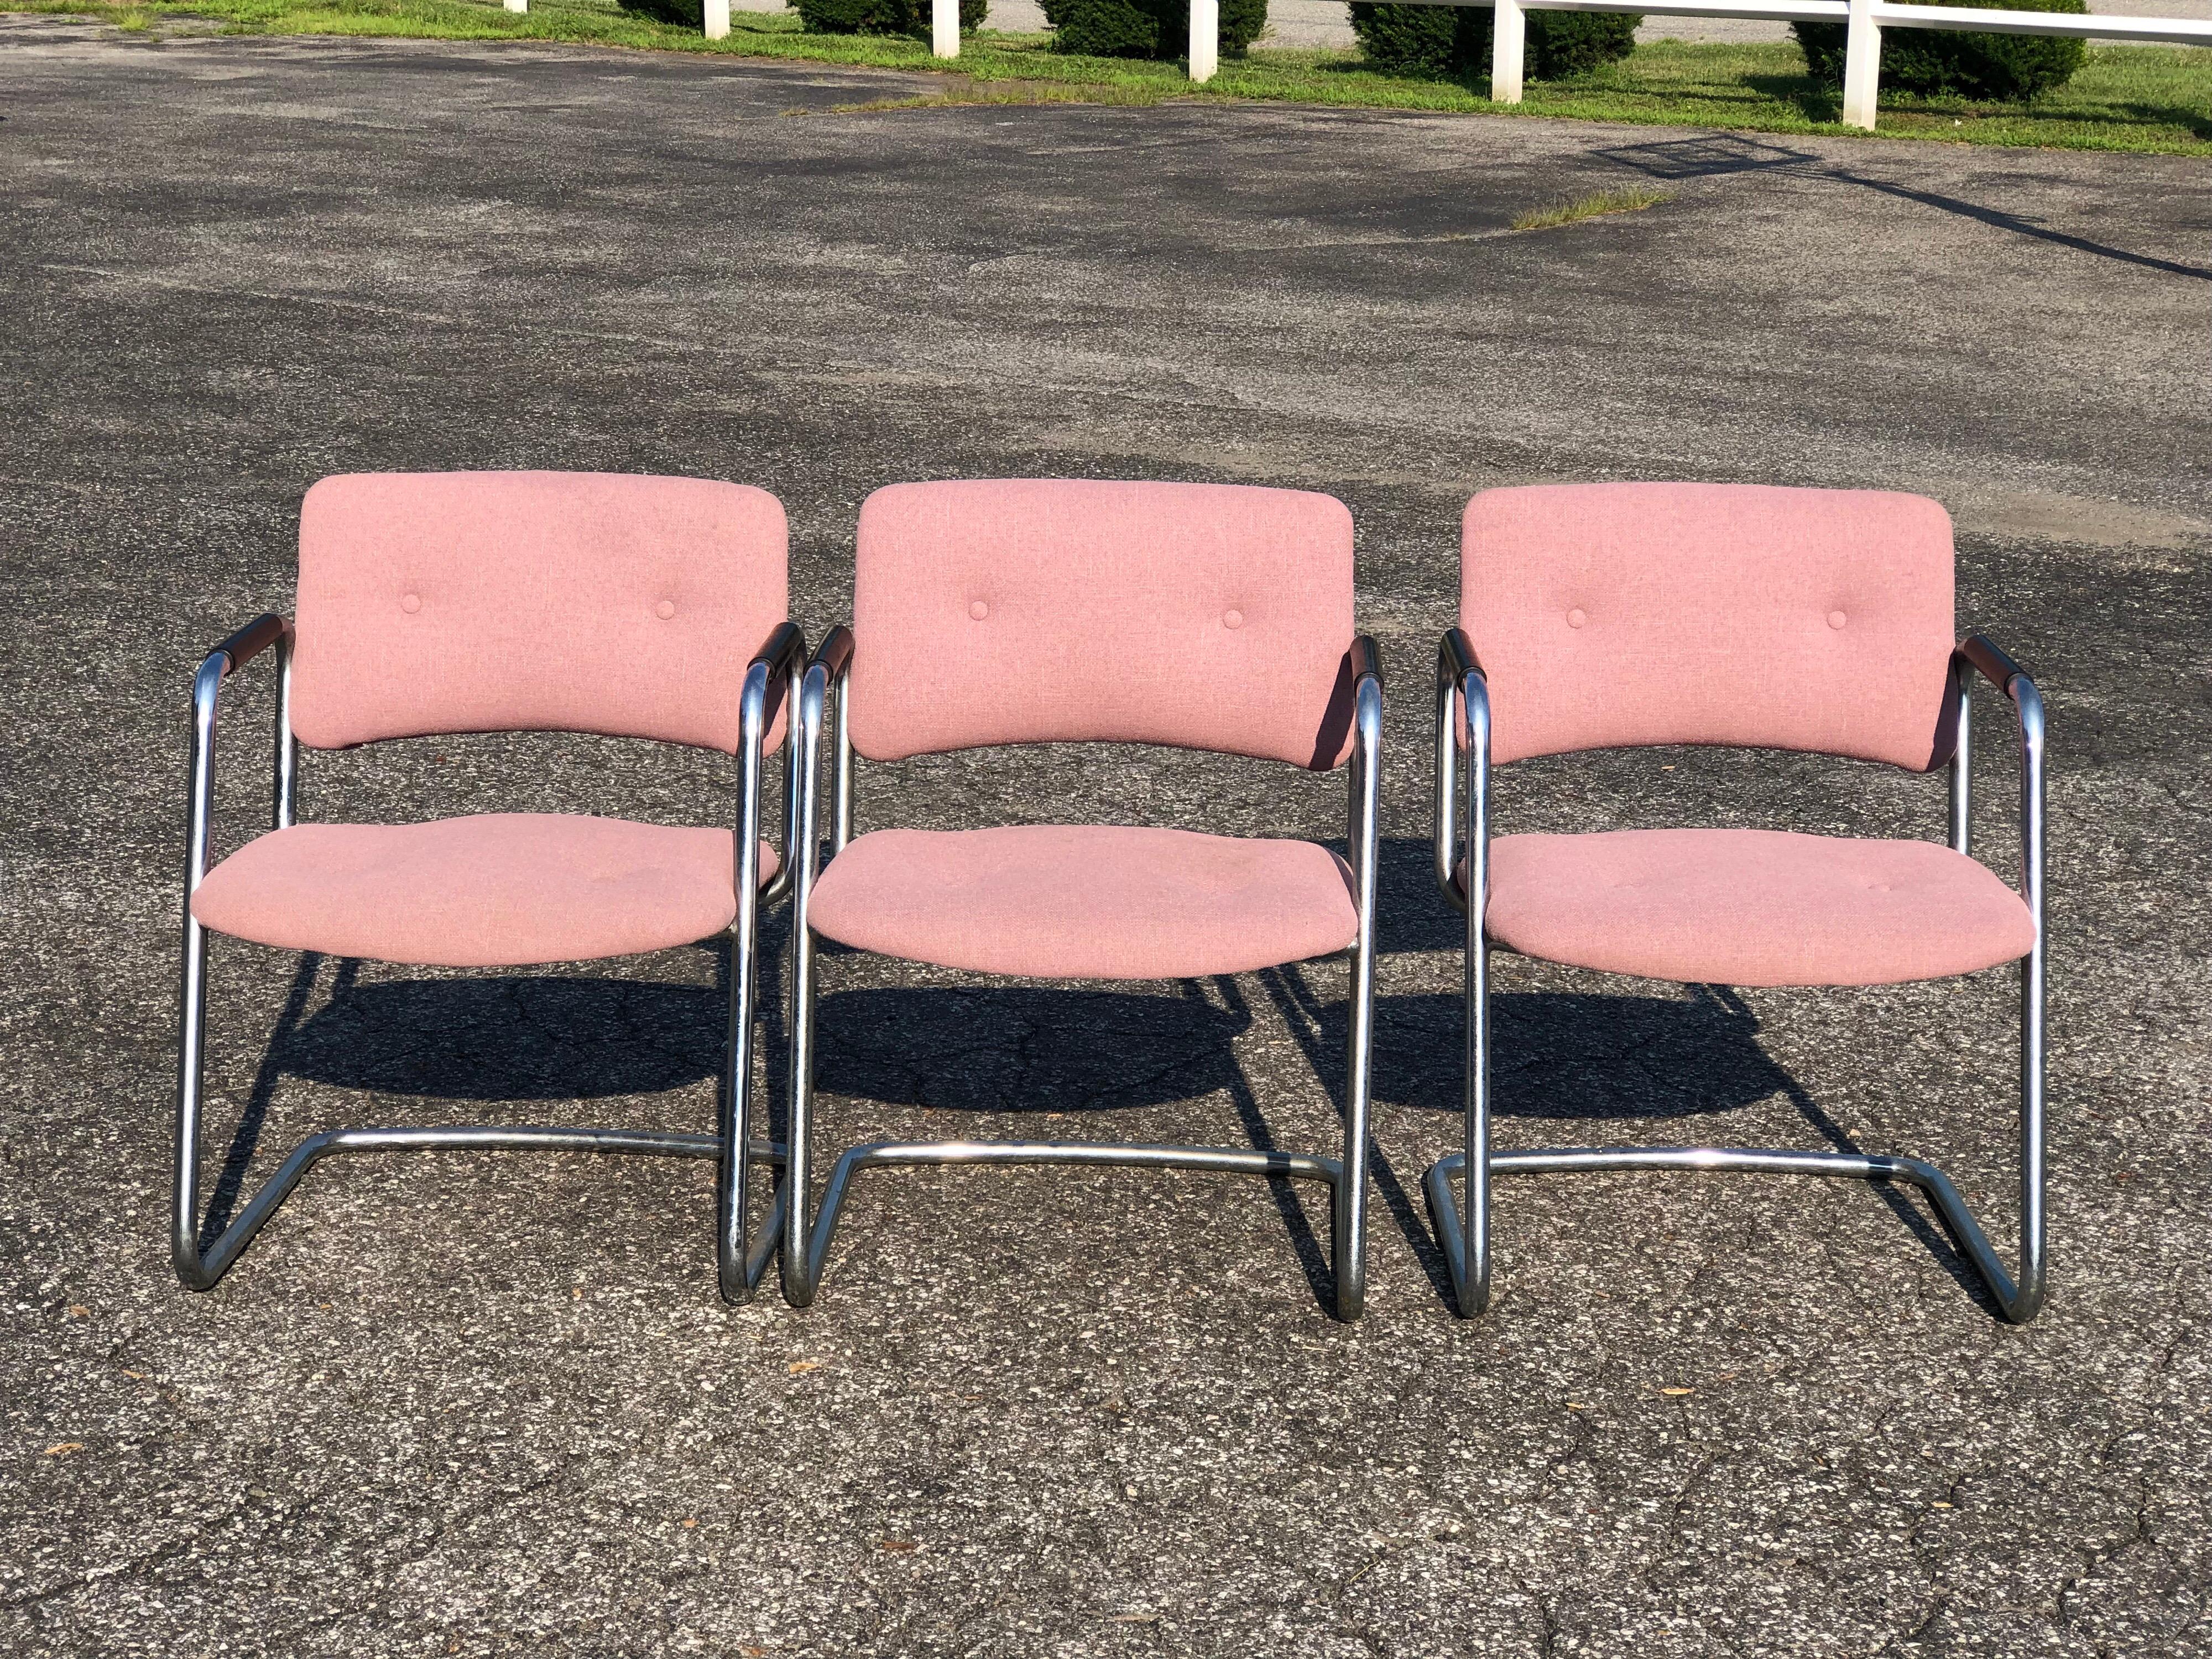 Set of three chrome steelcase chairs. In a light plum colored upholstery. Perfect for office or dining. Being sold individually. Buy one or all. Comfortable wide seat with nice cantilevered base. Durable rubbered arm rests in black make these